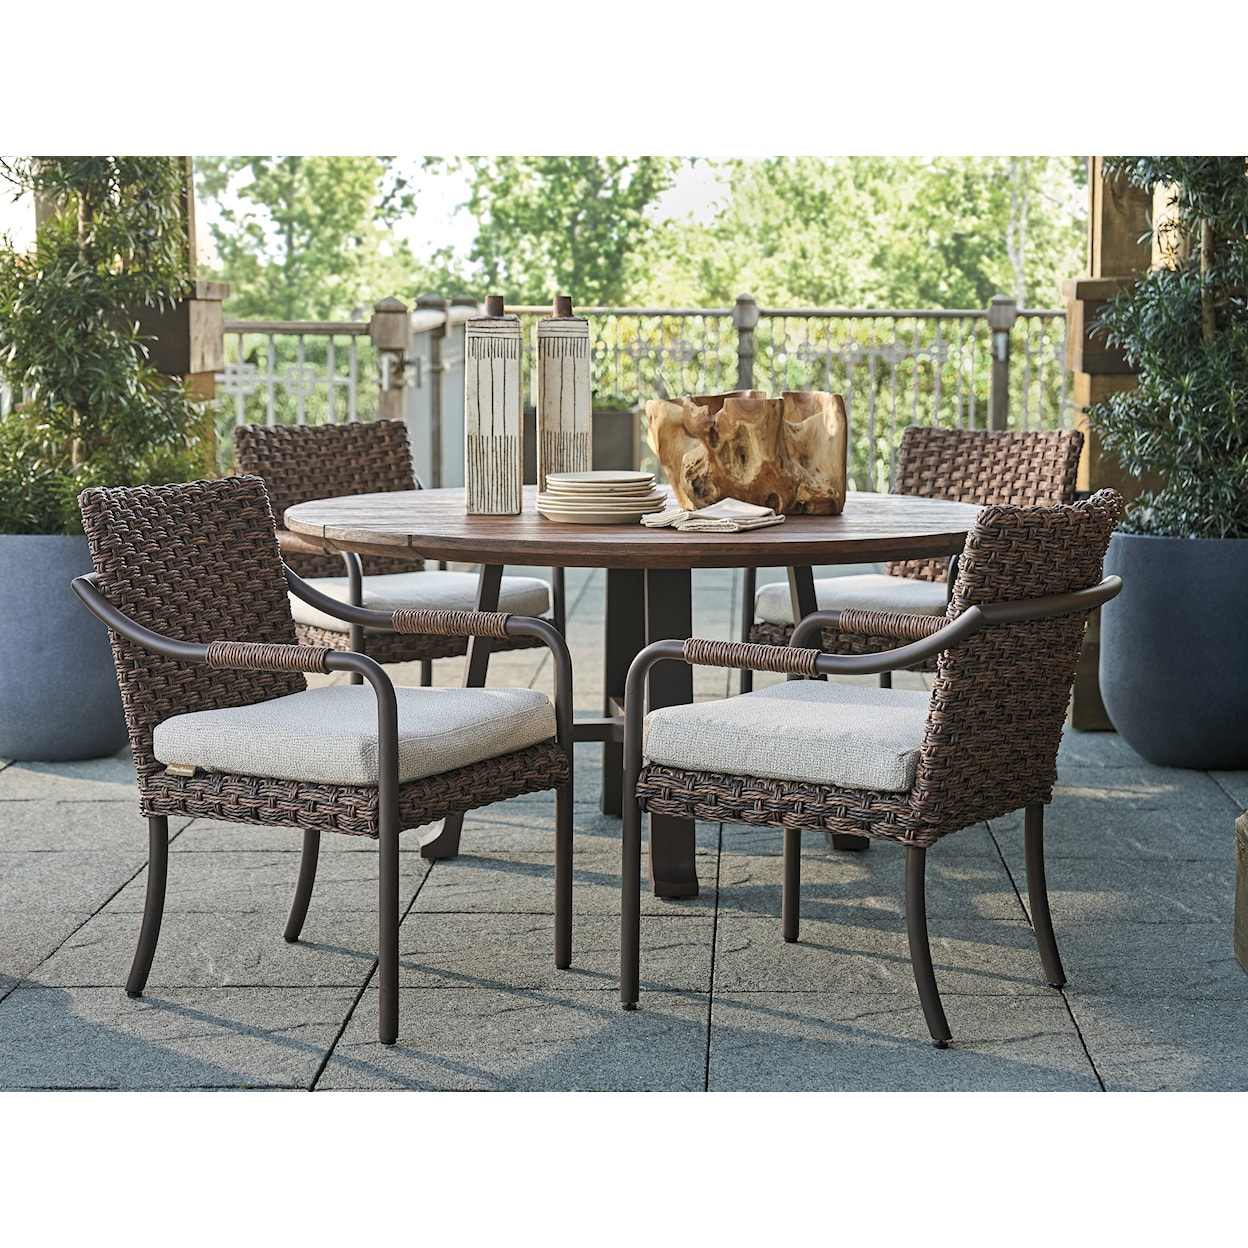 Tommy Bahama Outdoor Living Kilimanjaro Outdoor Dining Arm Chair